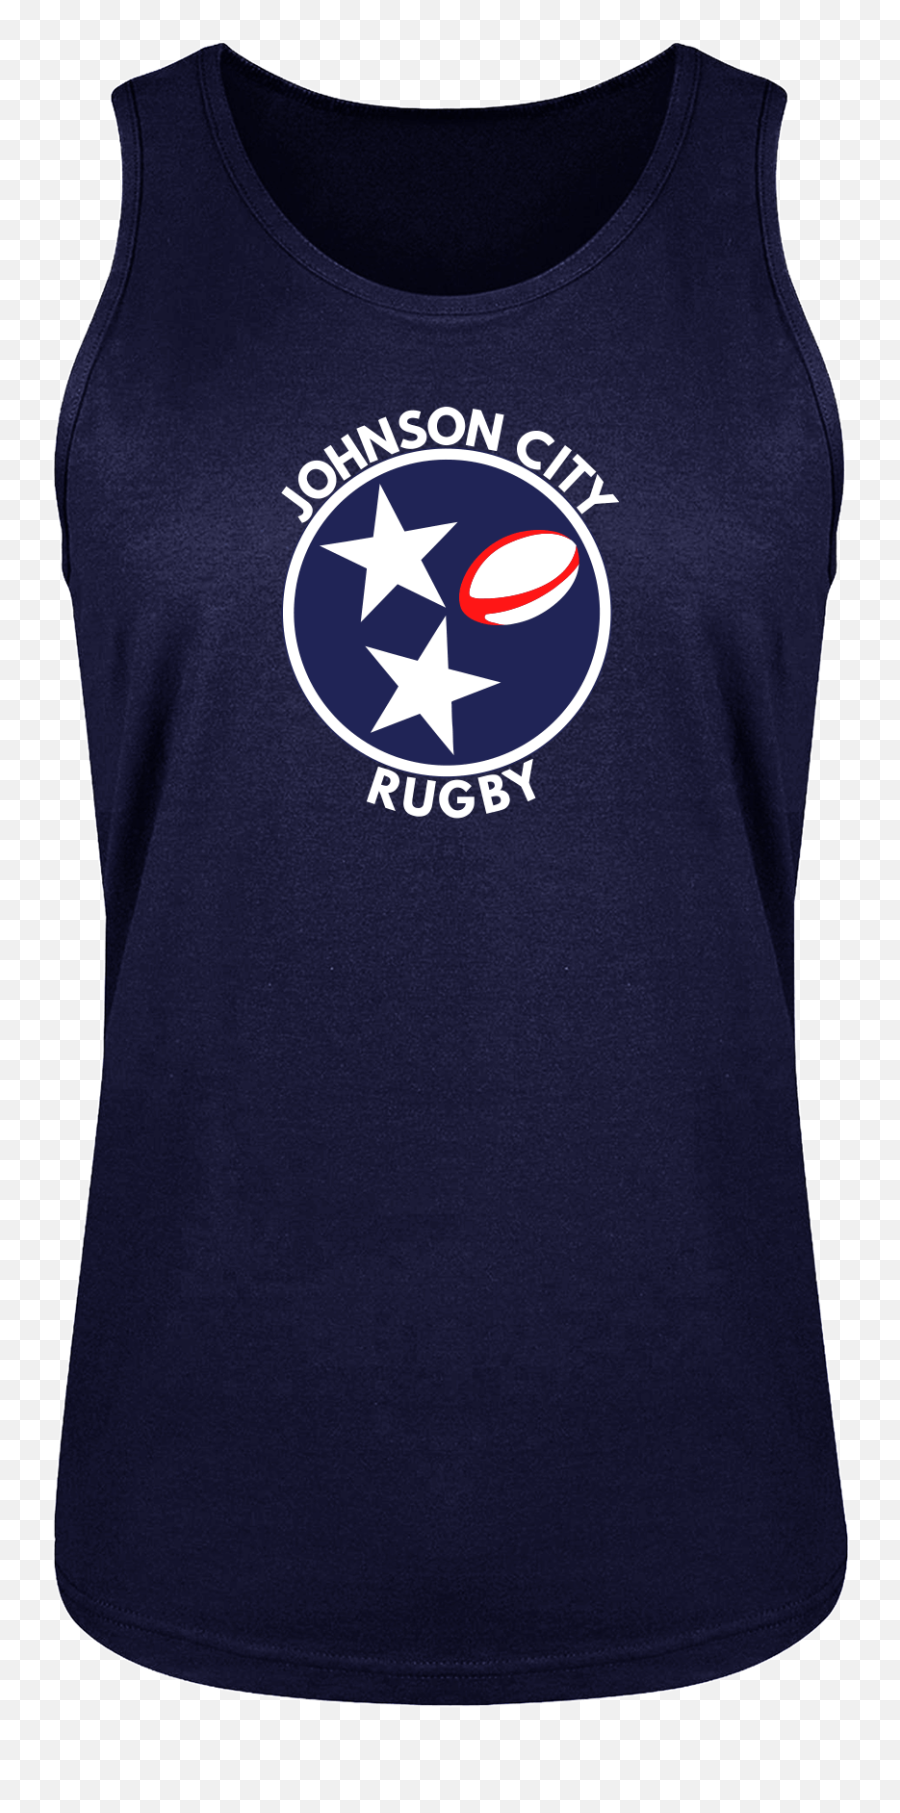 Johnston City Rugby Navy Singlet - Tennessee State Emoji,How To Do A Crescent And A Cross In An Emoticon